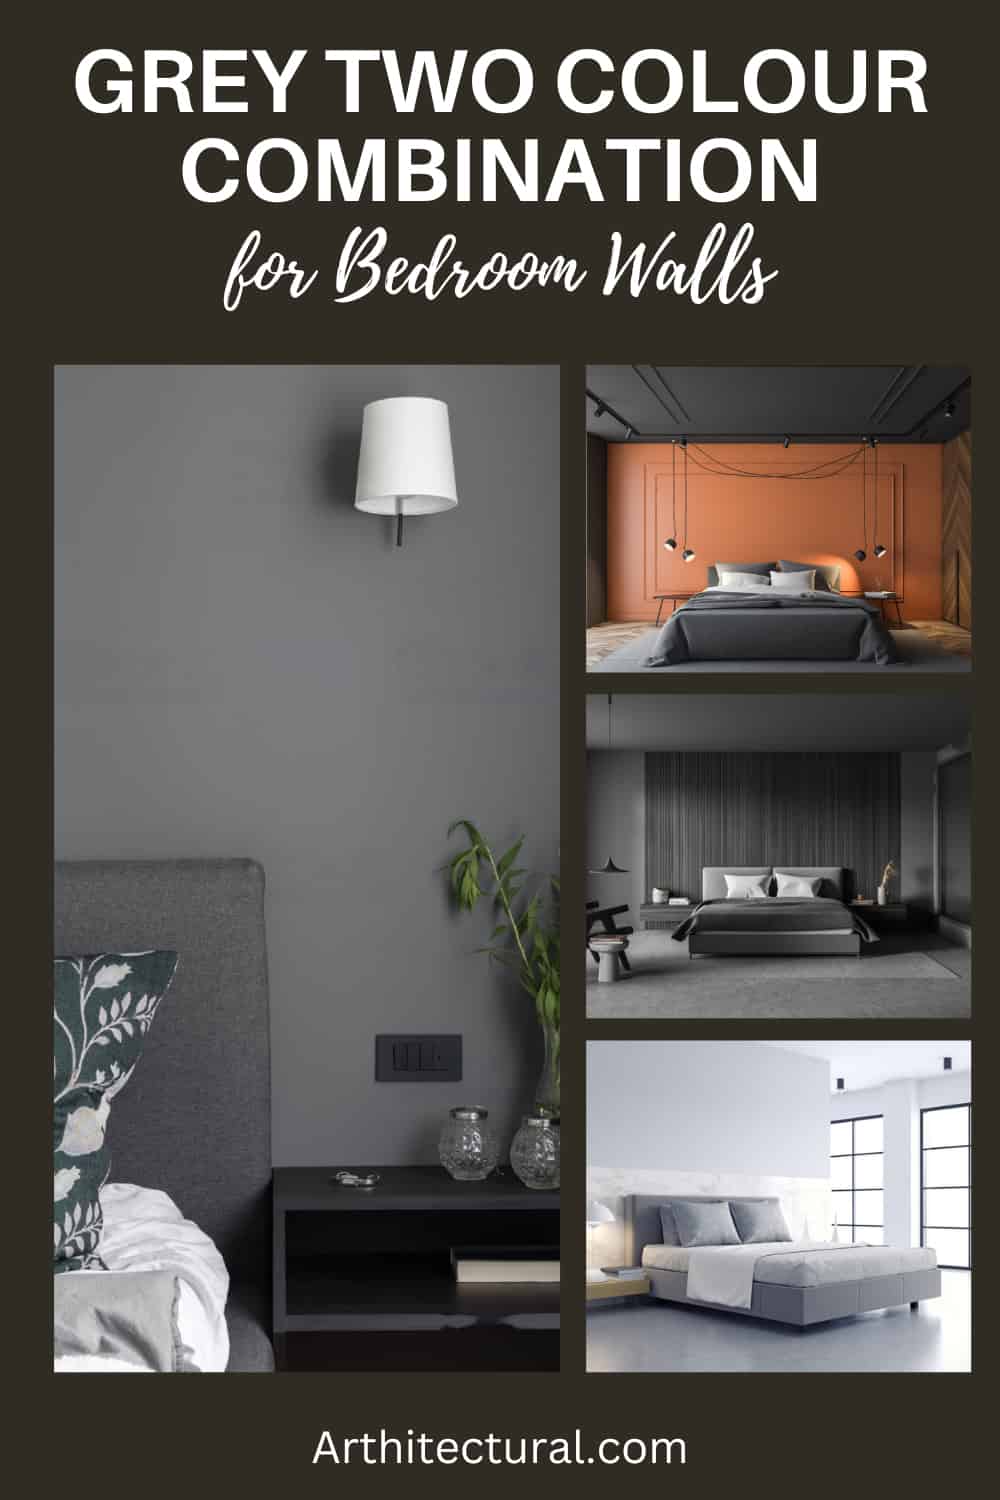 grey-two-colour-combination-for-bedroom-walls-images